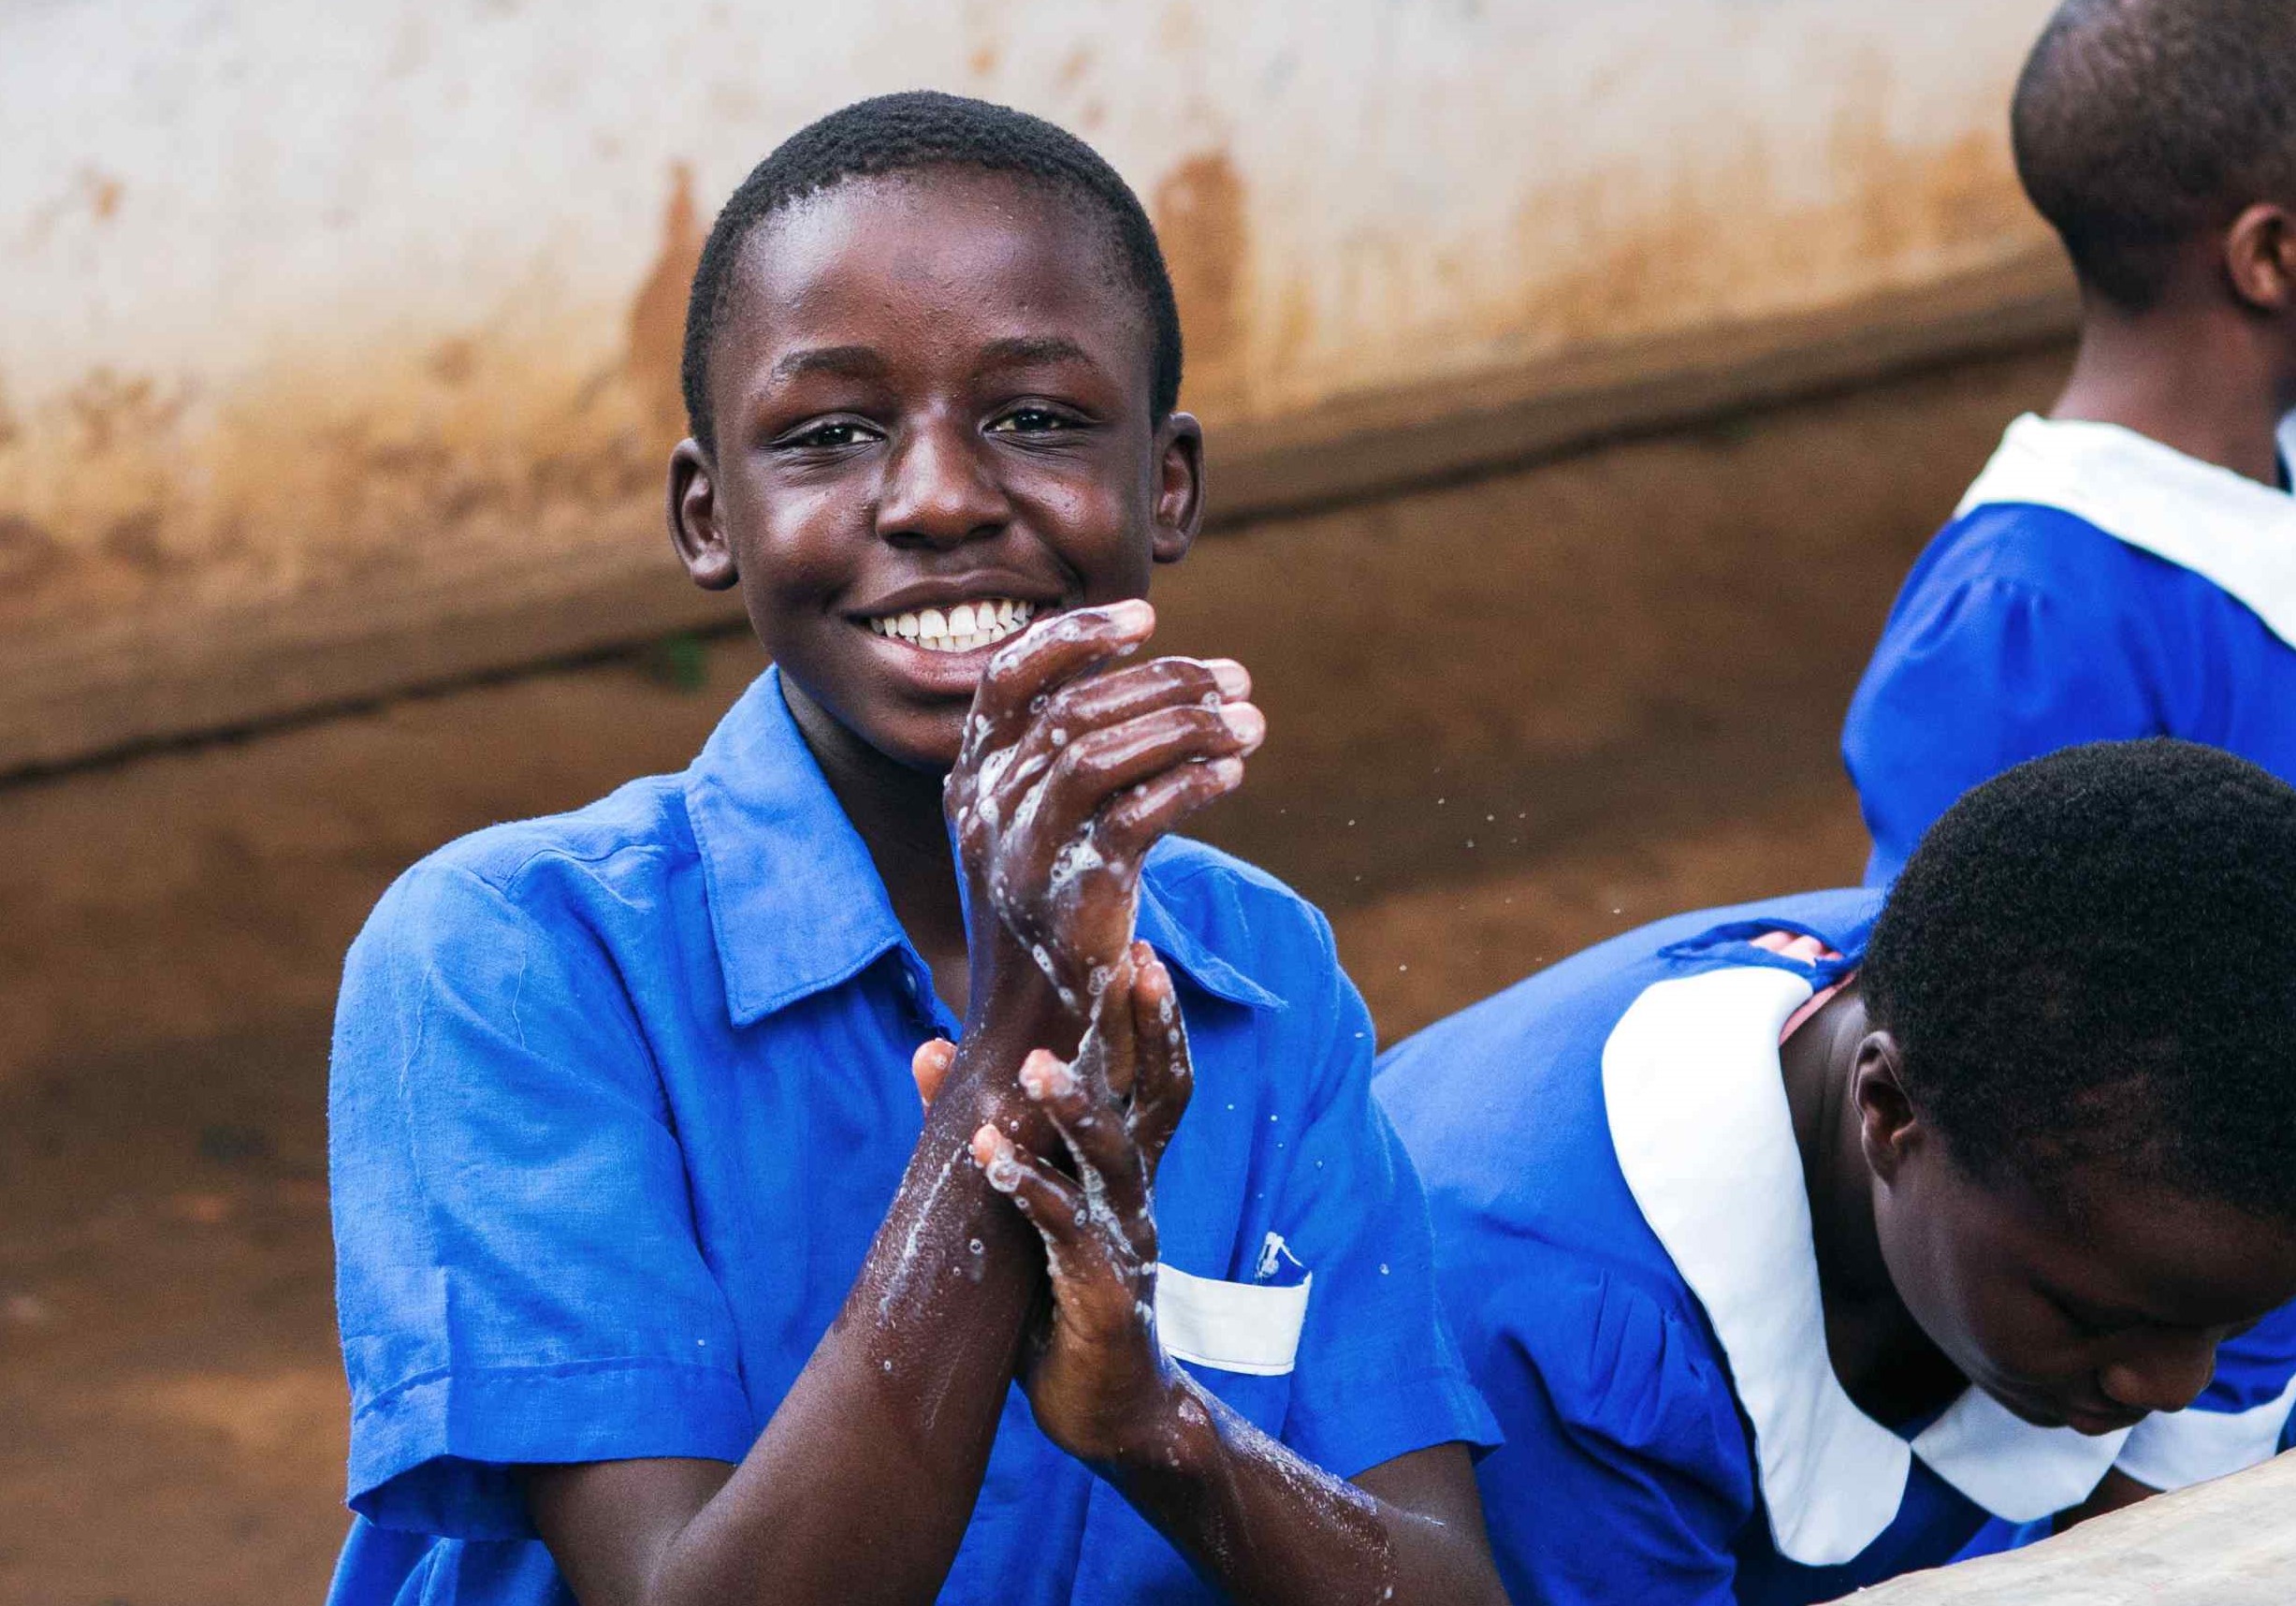 A student in uniform smiling while washing their hands outside at a handwashing station